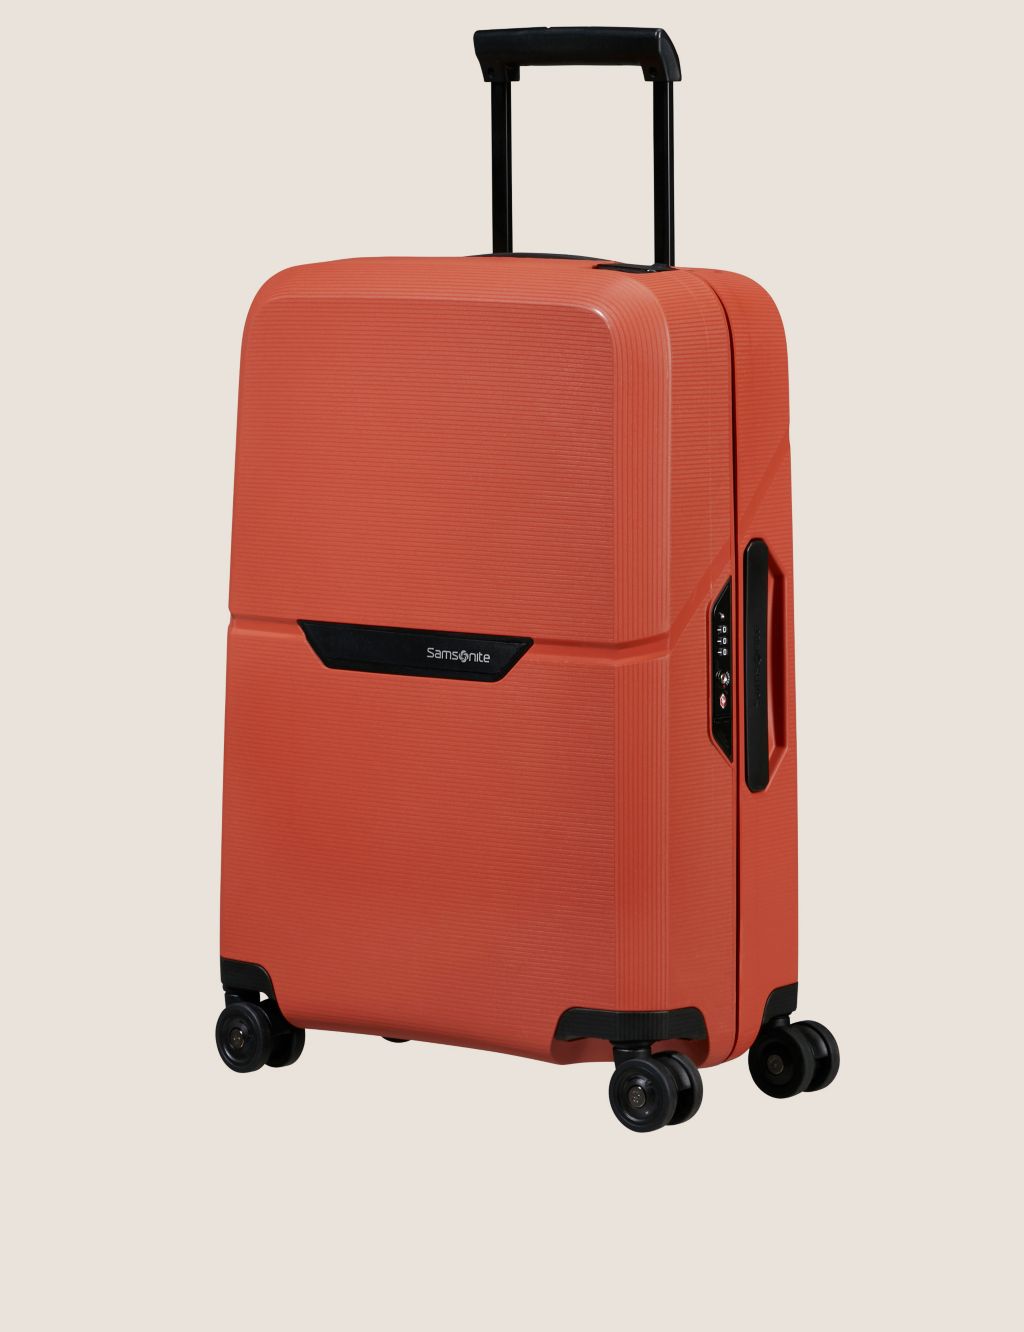 Magnum 4 Wheel Hard Shell Eco Cabin Suitcase